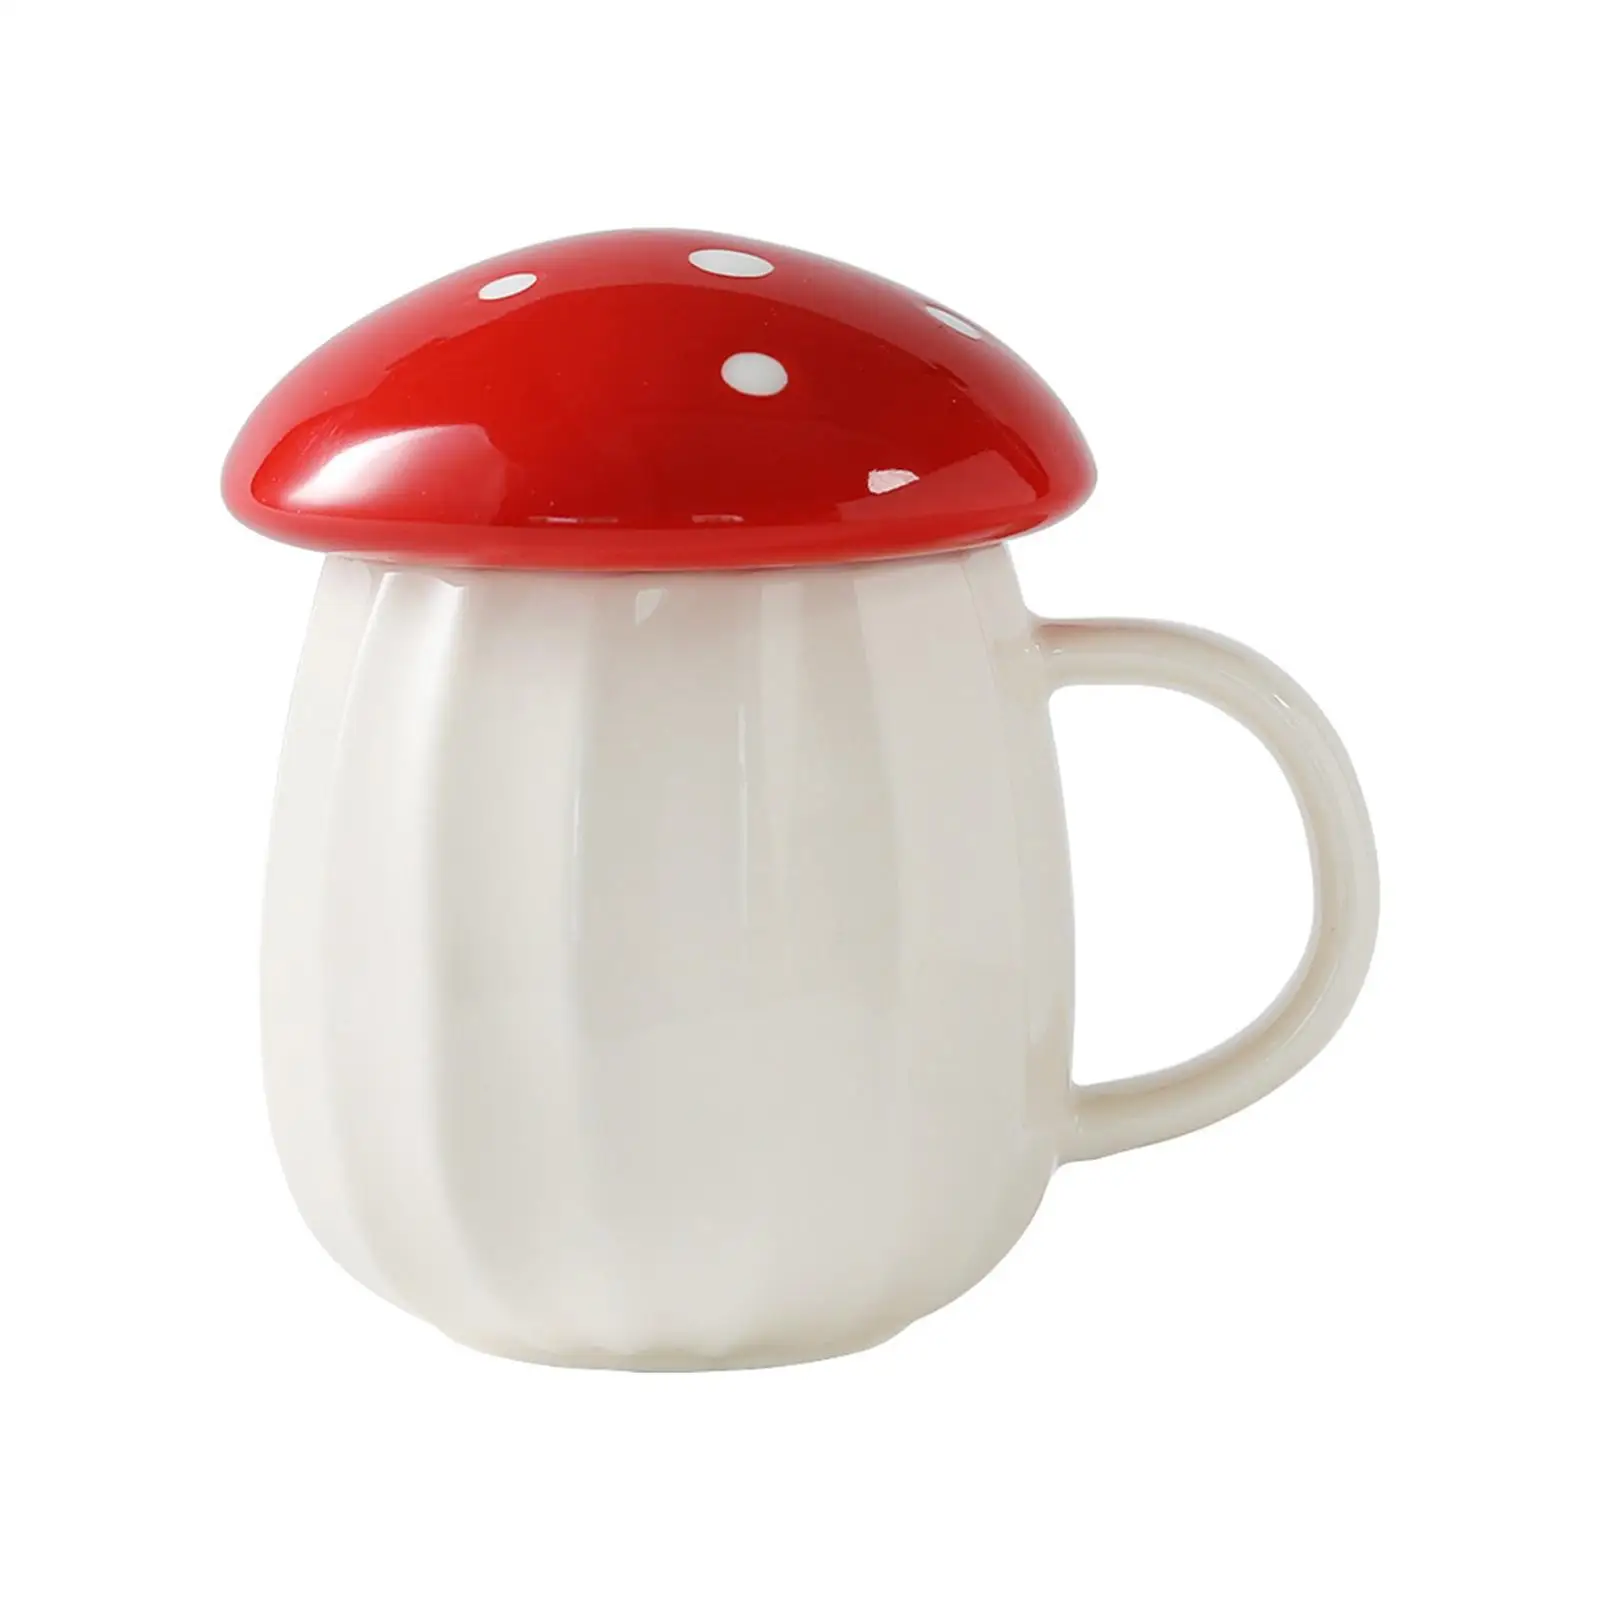 Mushroom Cup Mug Thickened Handle Gift Water Bottle Ceramic Cup for Office Household